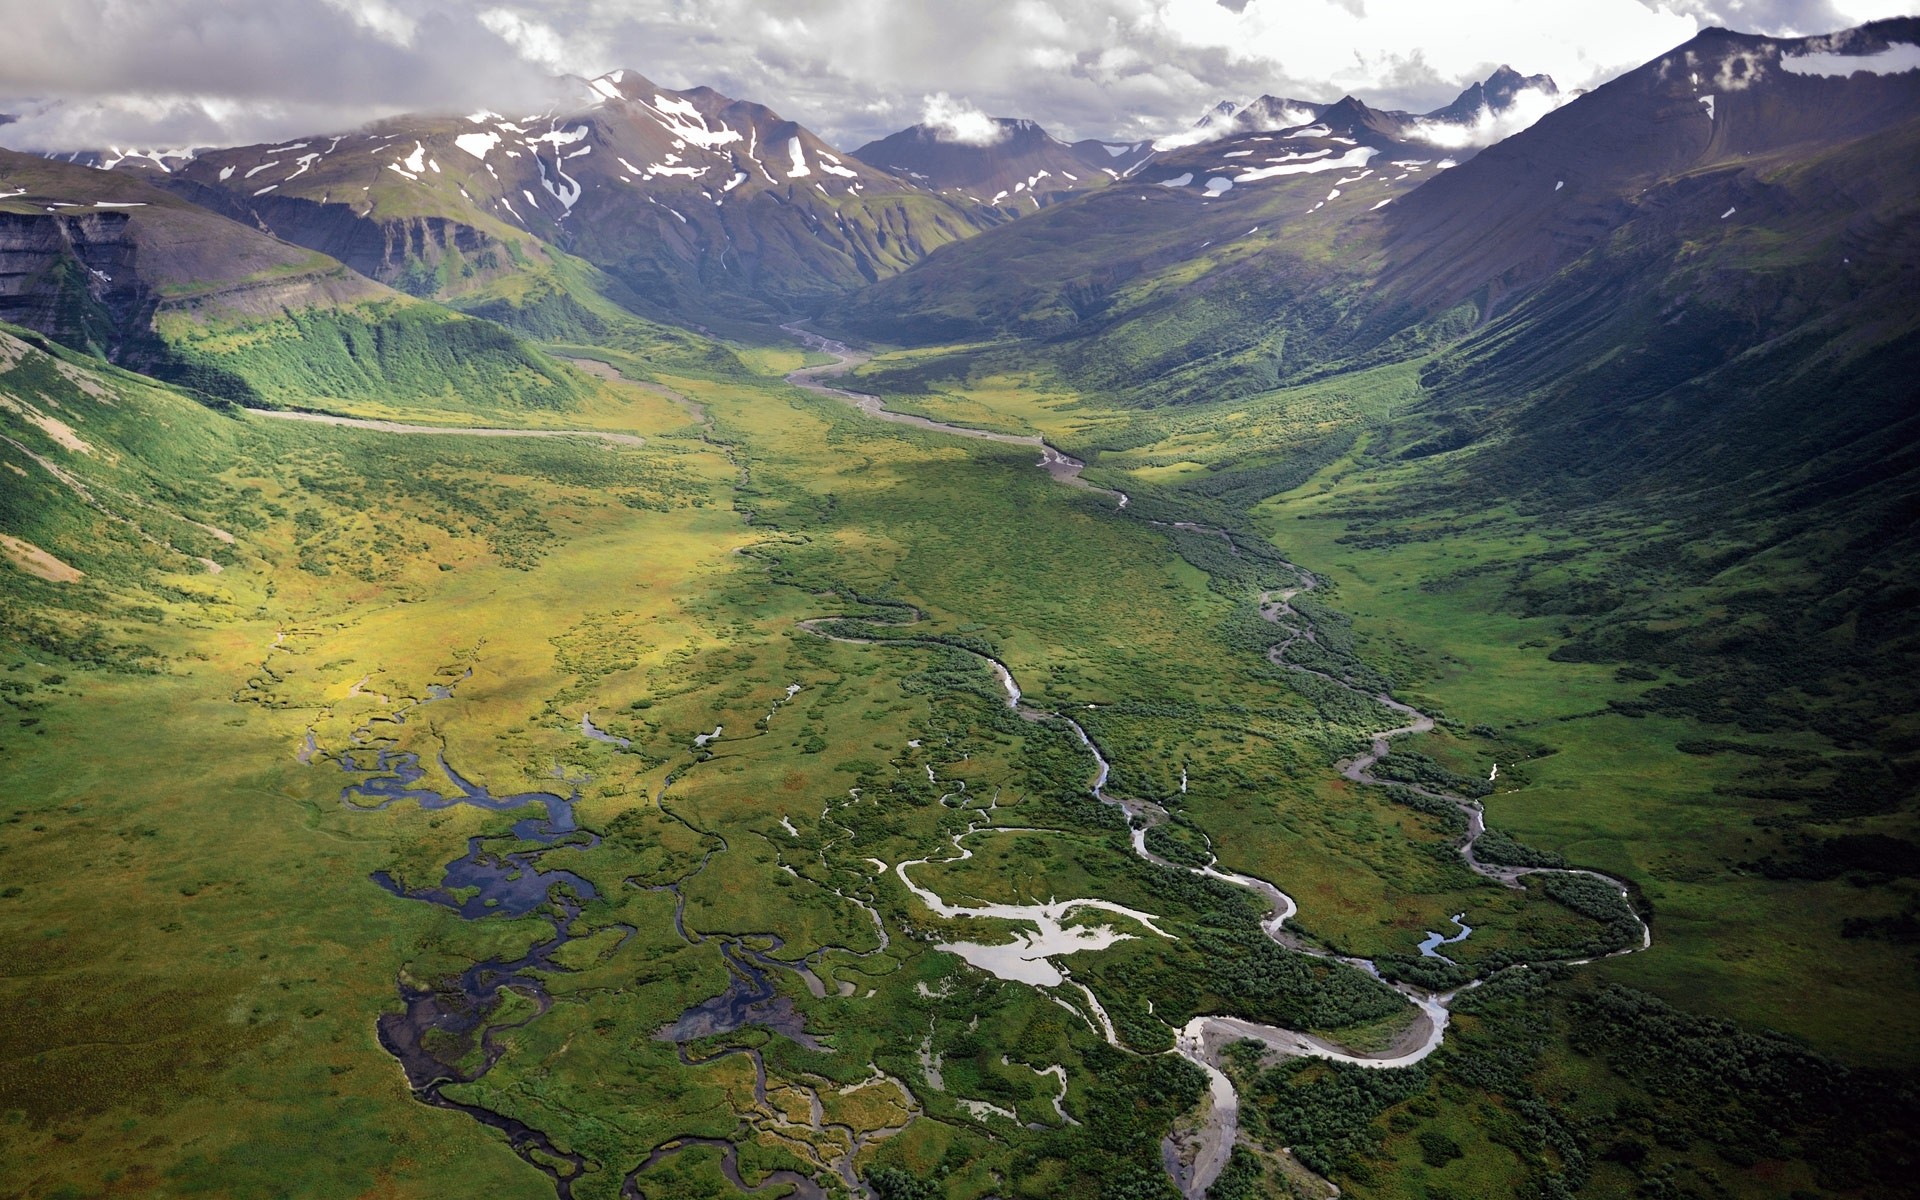 General 1920x1200 landscape nature valley river aerial view mountains Alaska snowy peak clouds green spring nordic landscapes